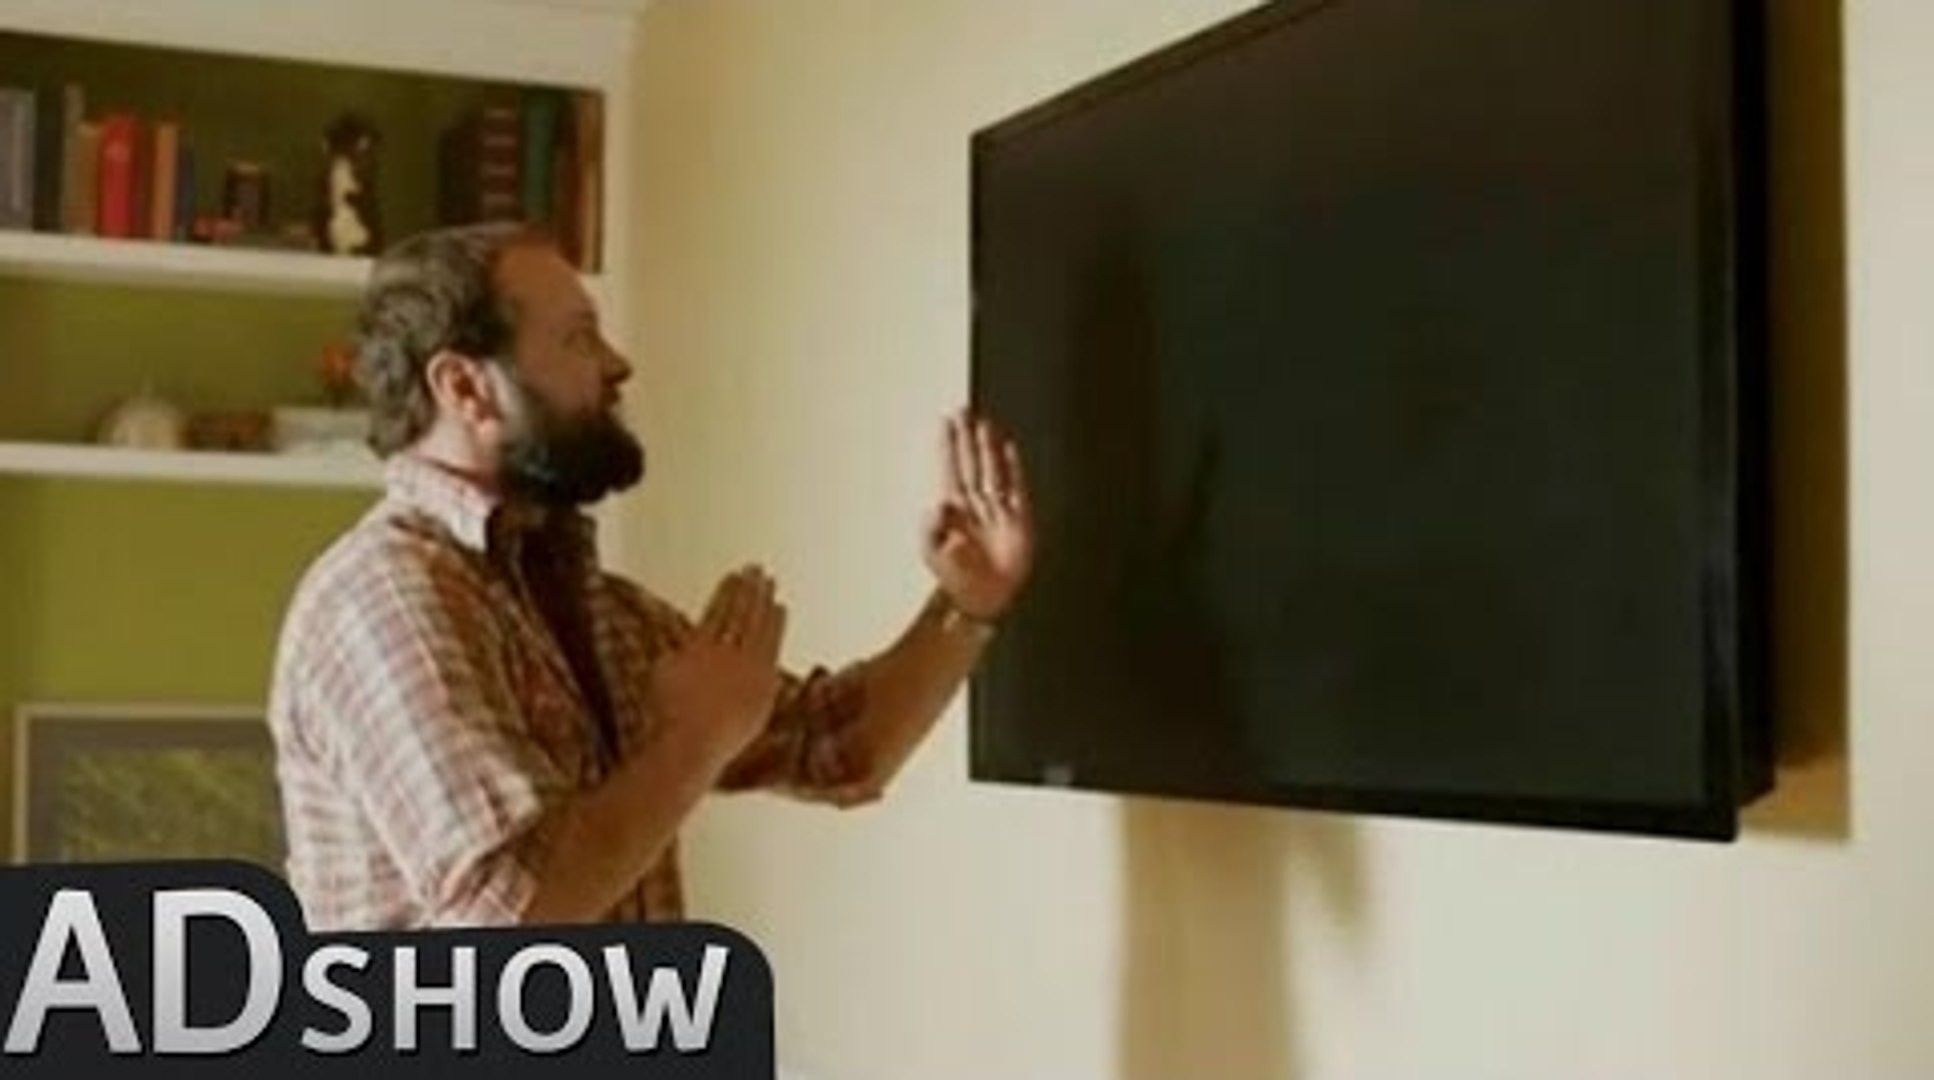 Epic fail: Brand new TV falls off the wall! - Vidéo Dailymotion